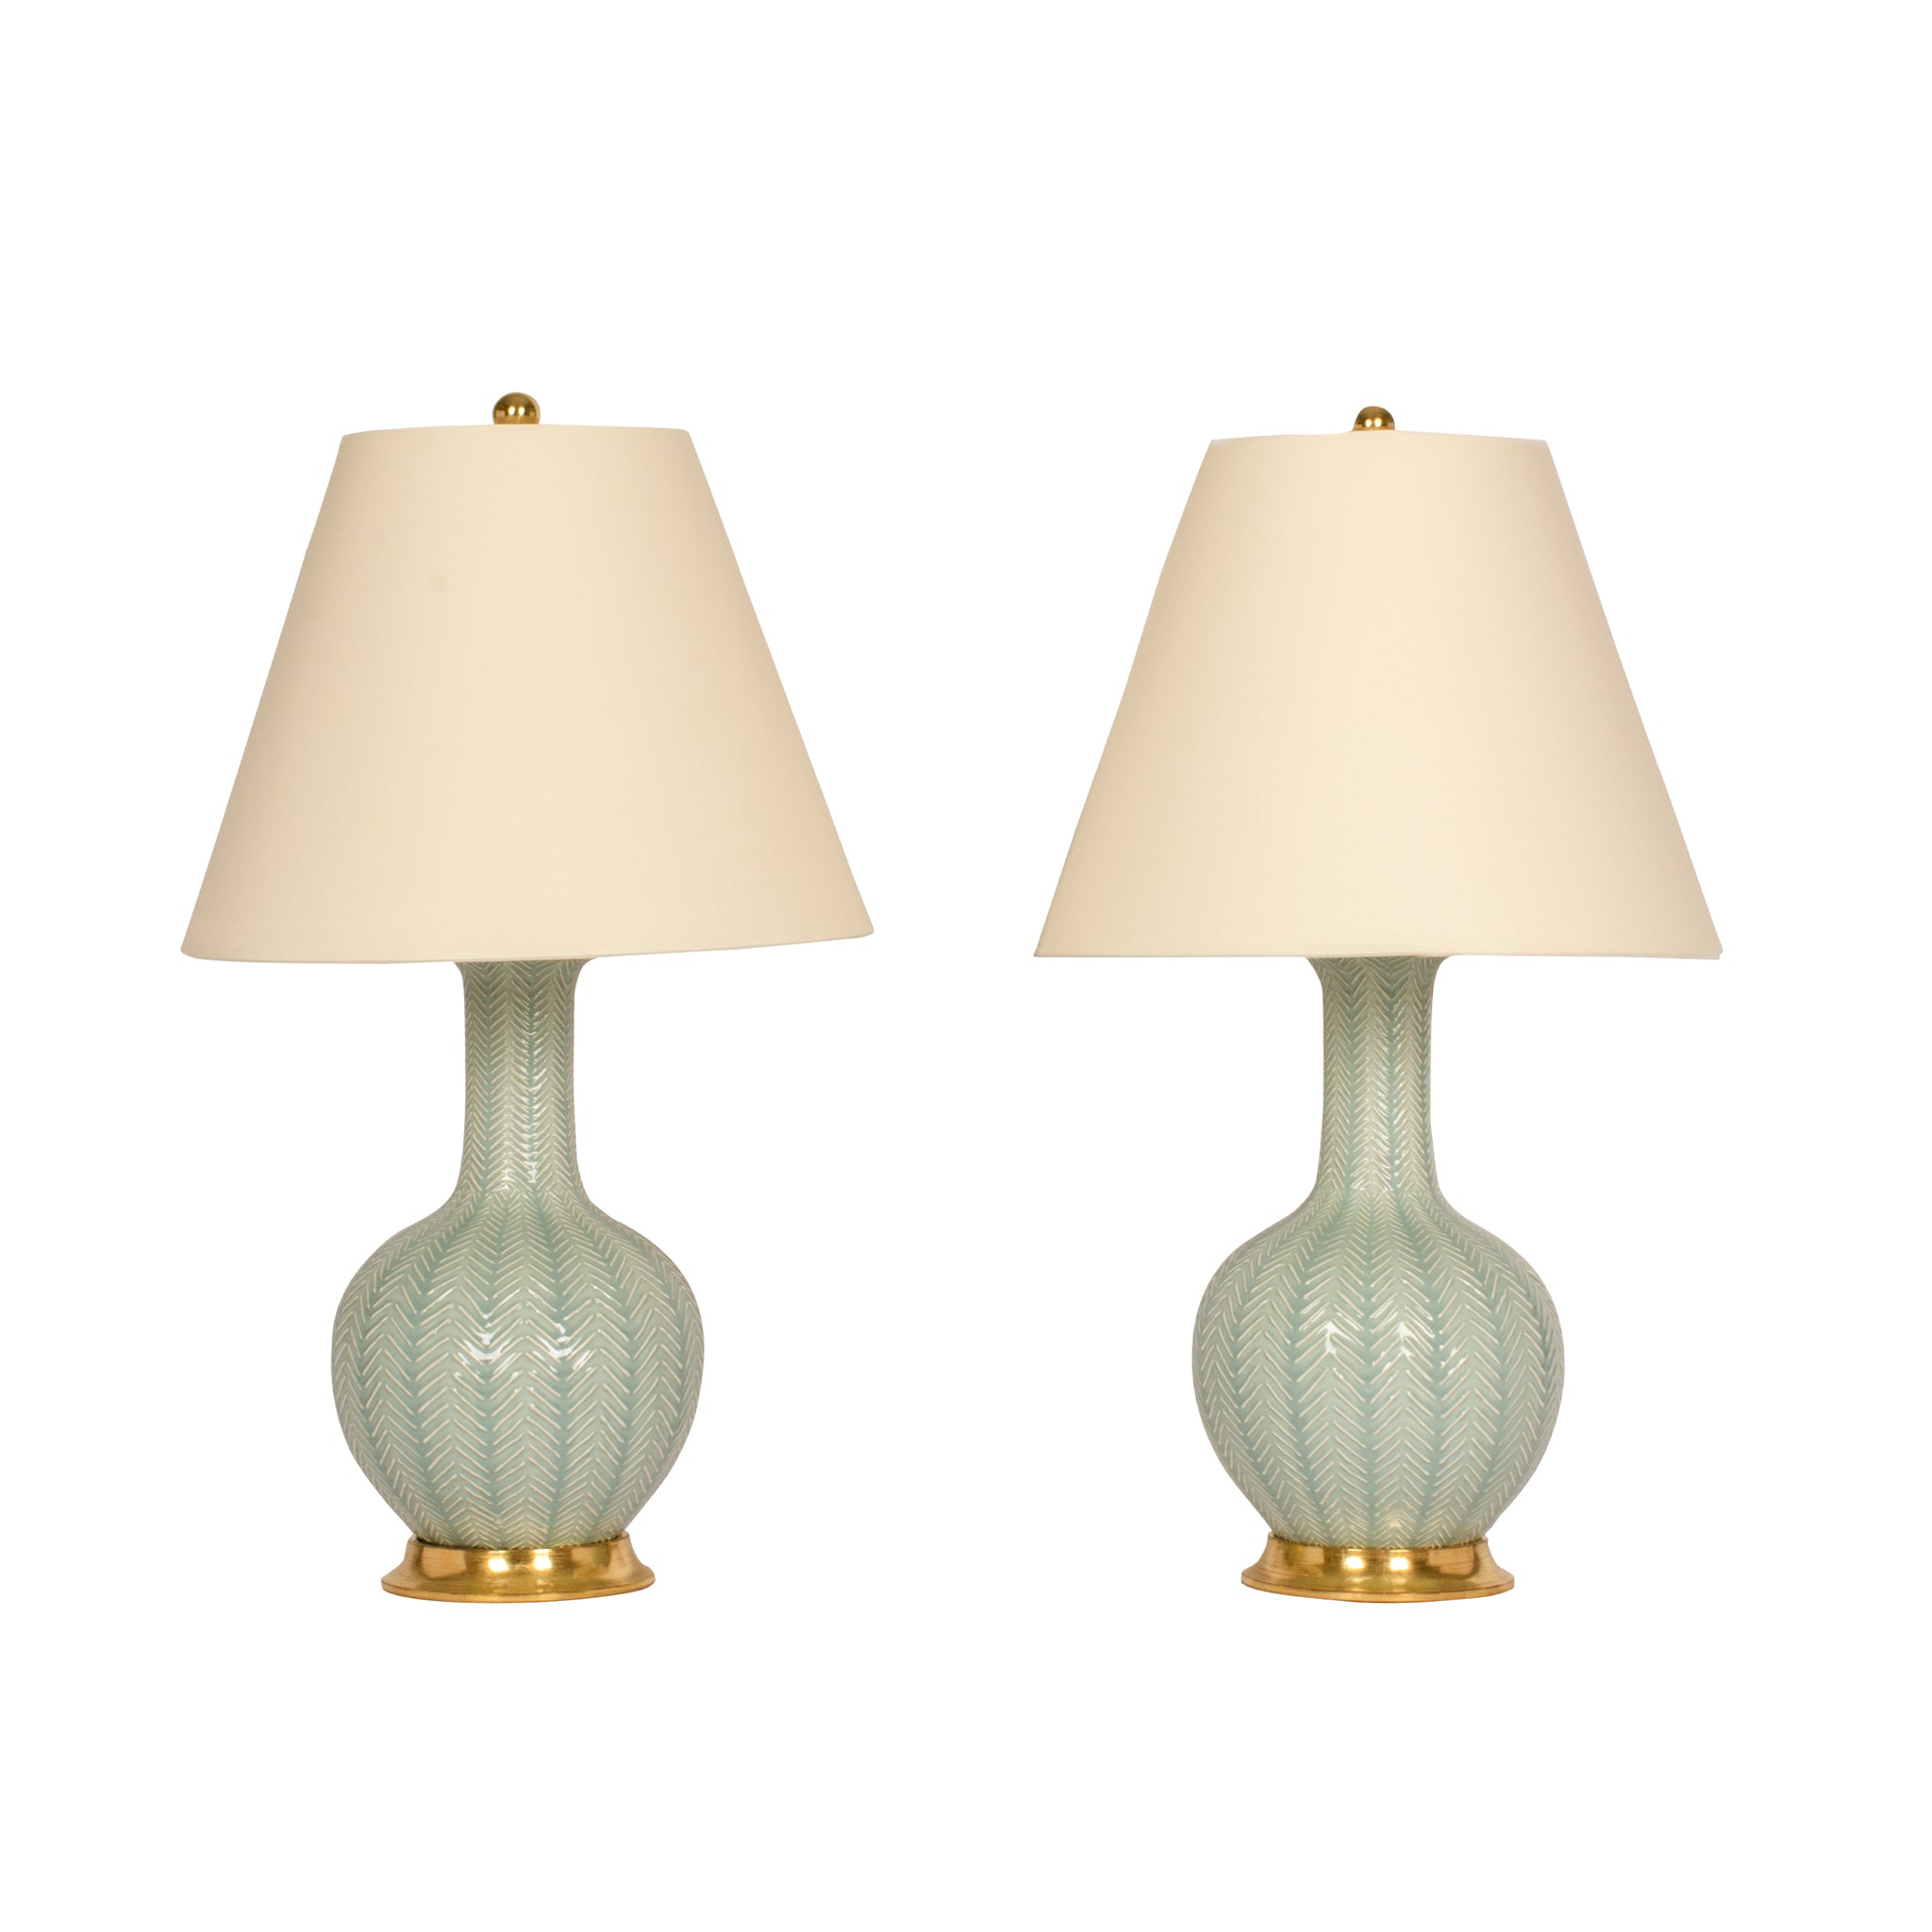 Pair of Small Single Gourd Lamps in Duck Egg Chevron